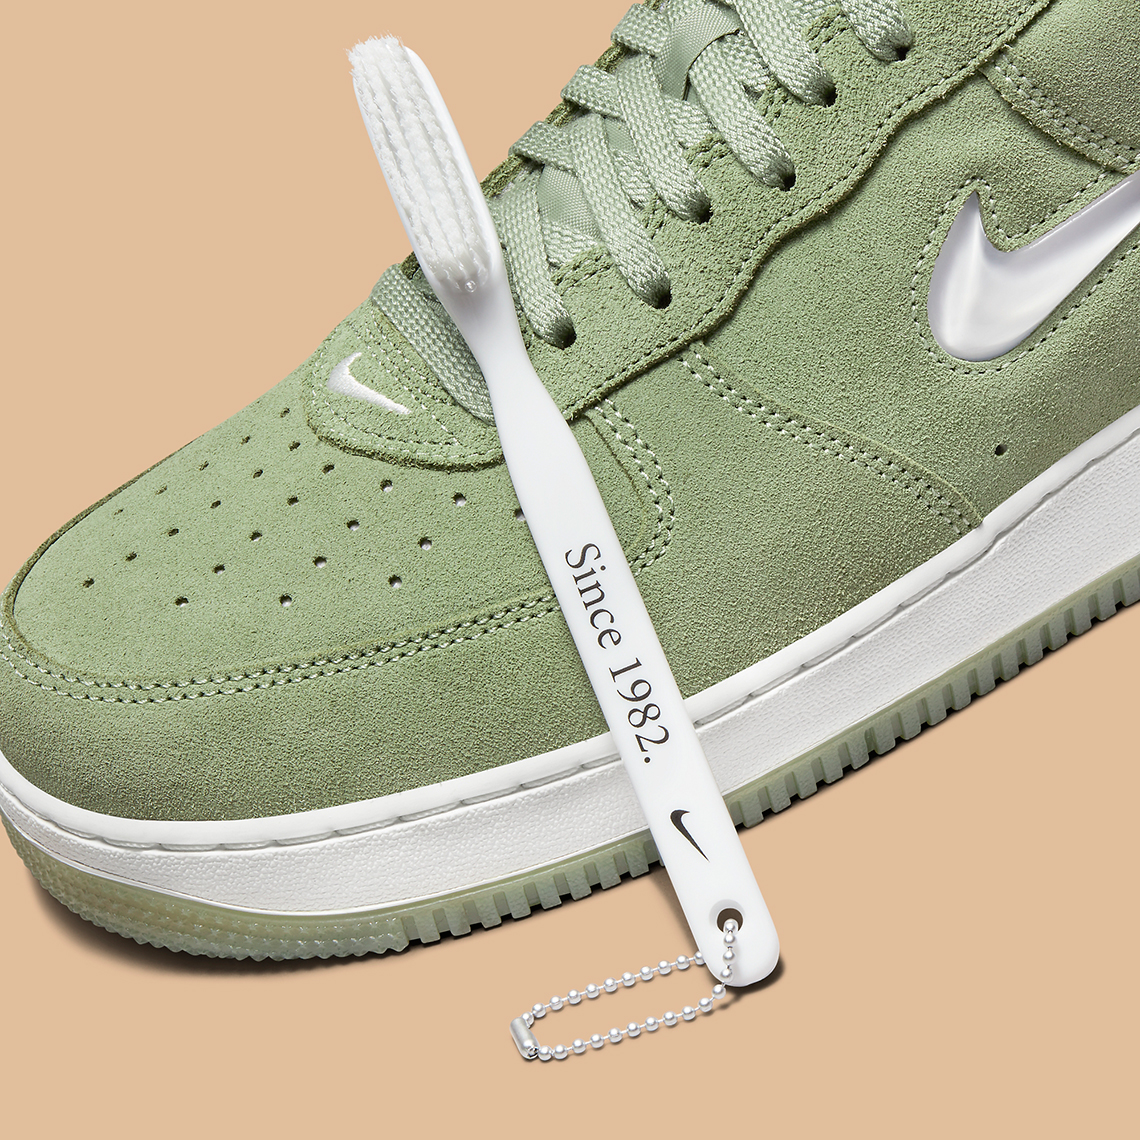 Suede And Canvas Cover The Nike Air Force 1 Low LX Oil Green - Sneaker News